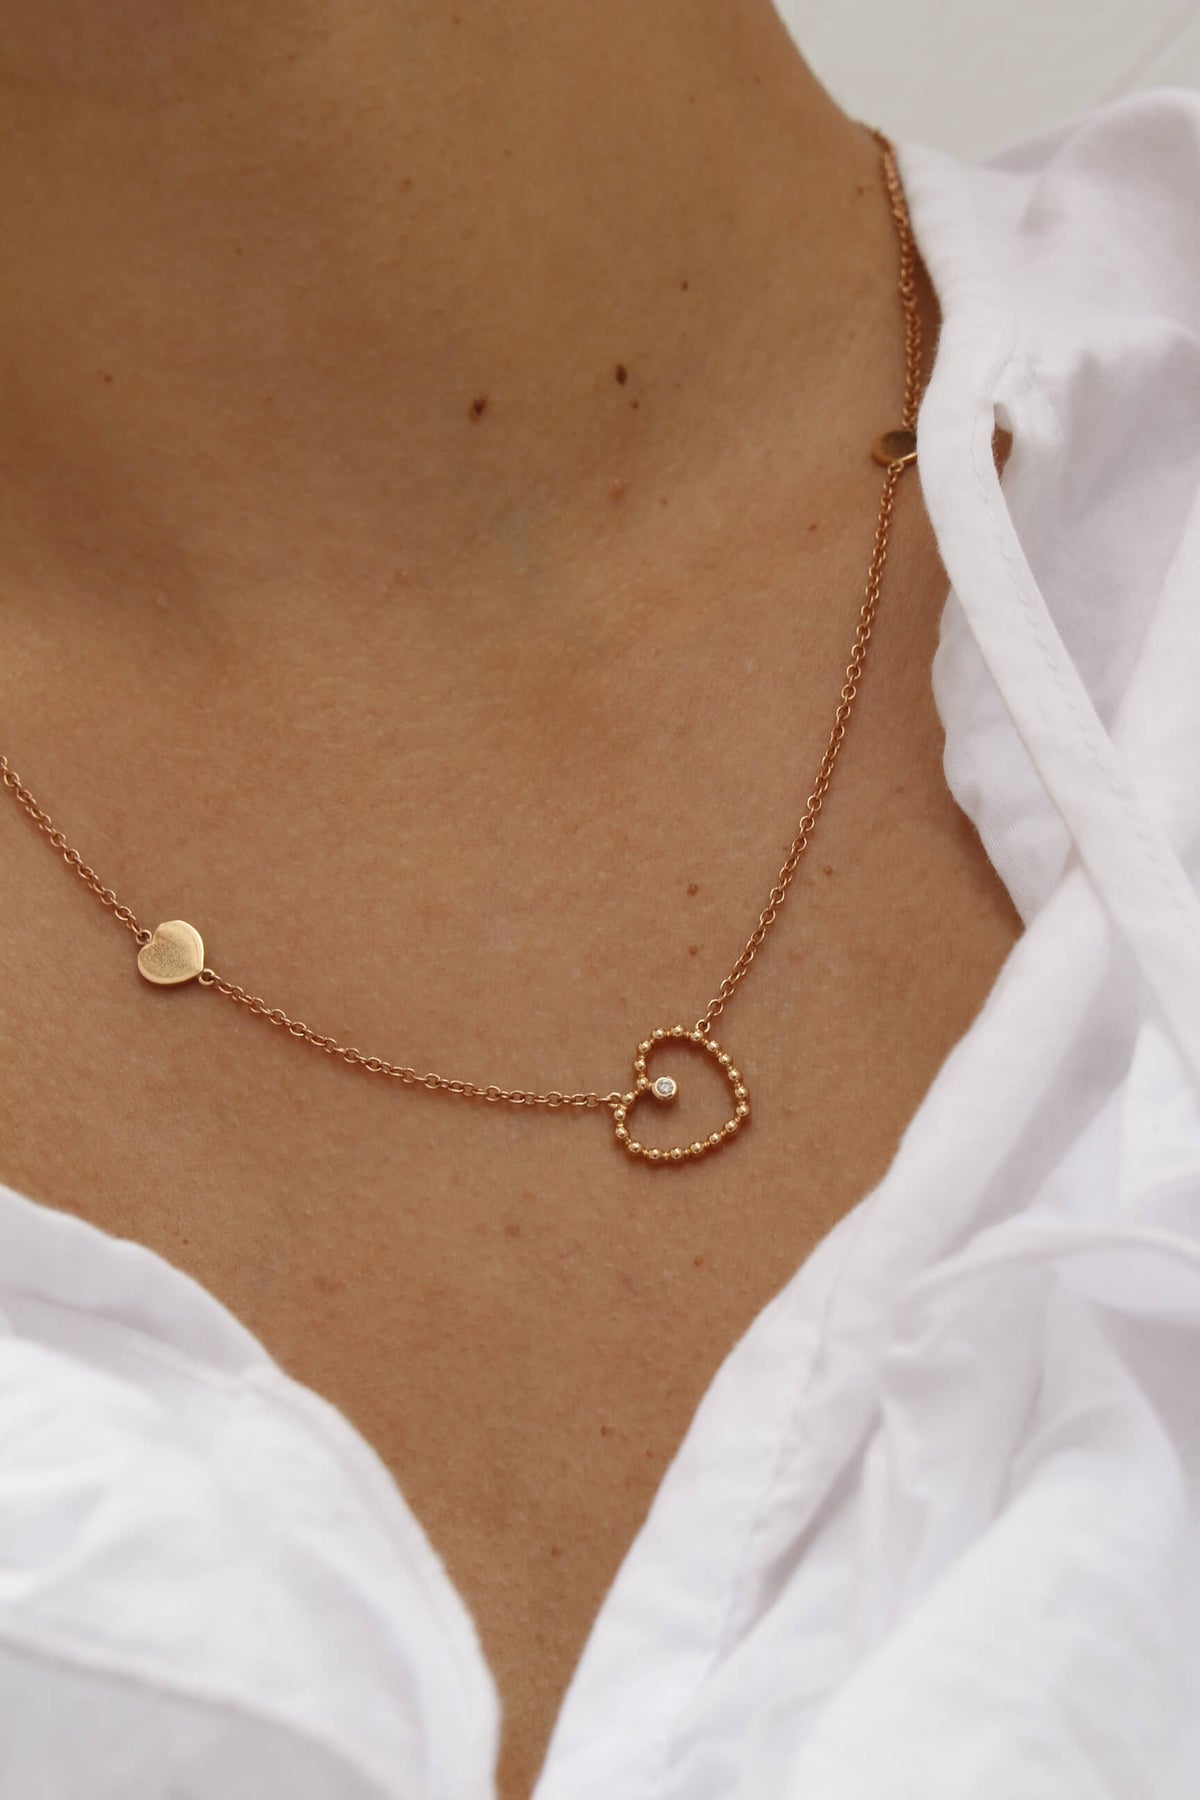 Palladio Heart Necklace in 18k Rose Gold with Diamond - Orsini Jewellers NZ